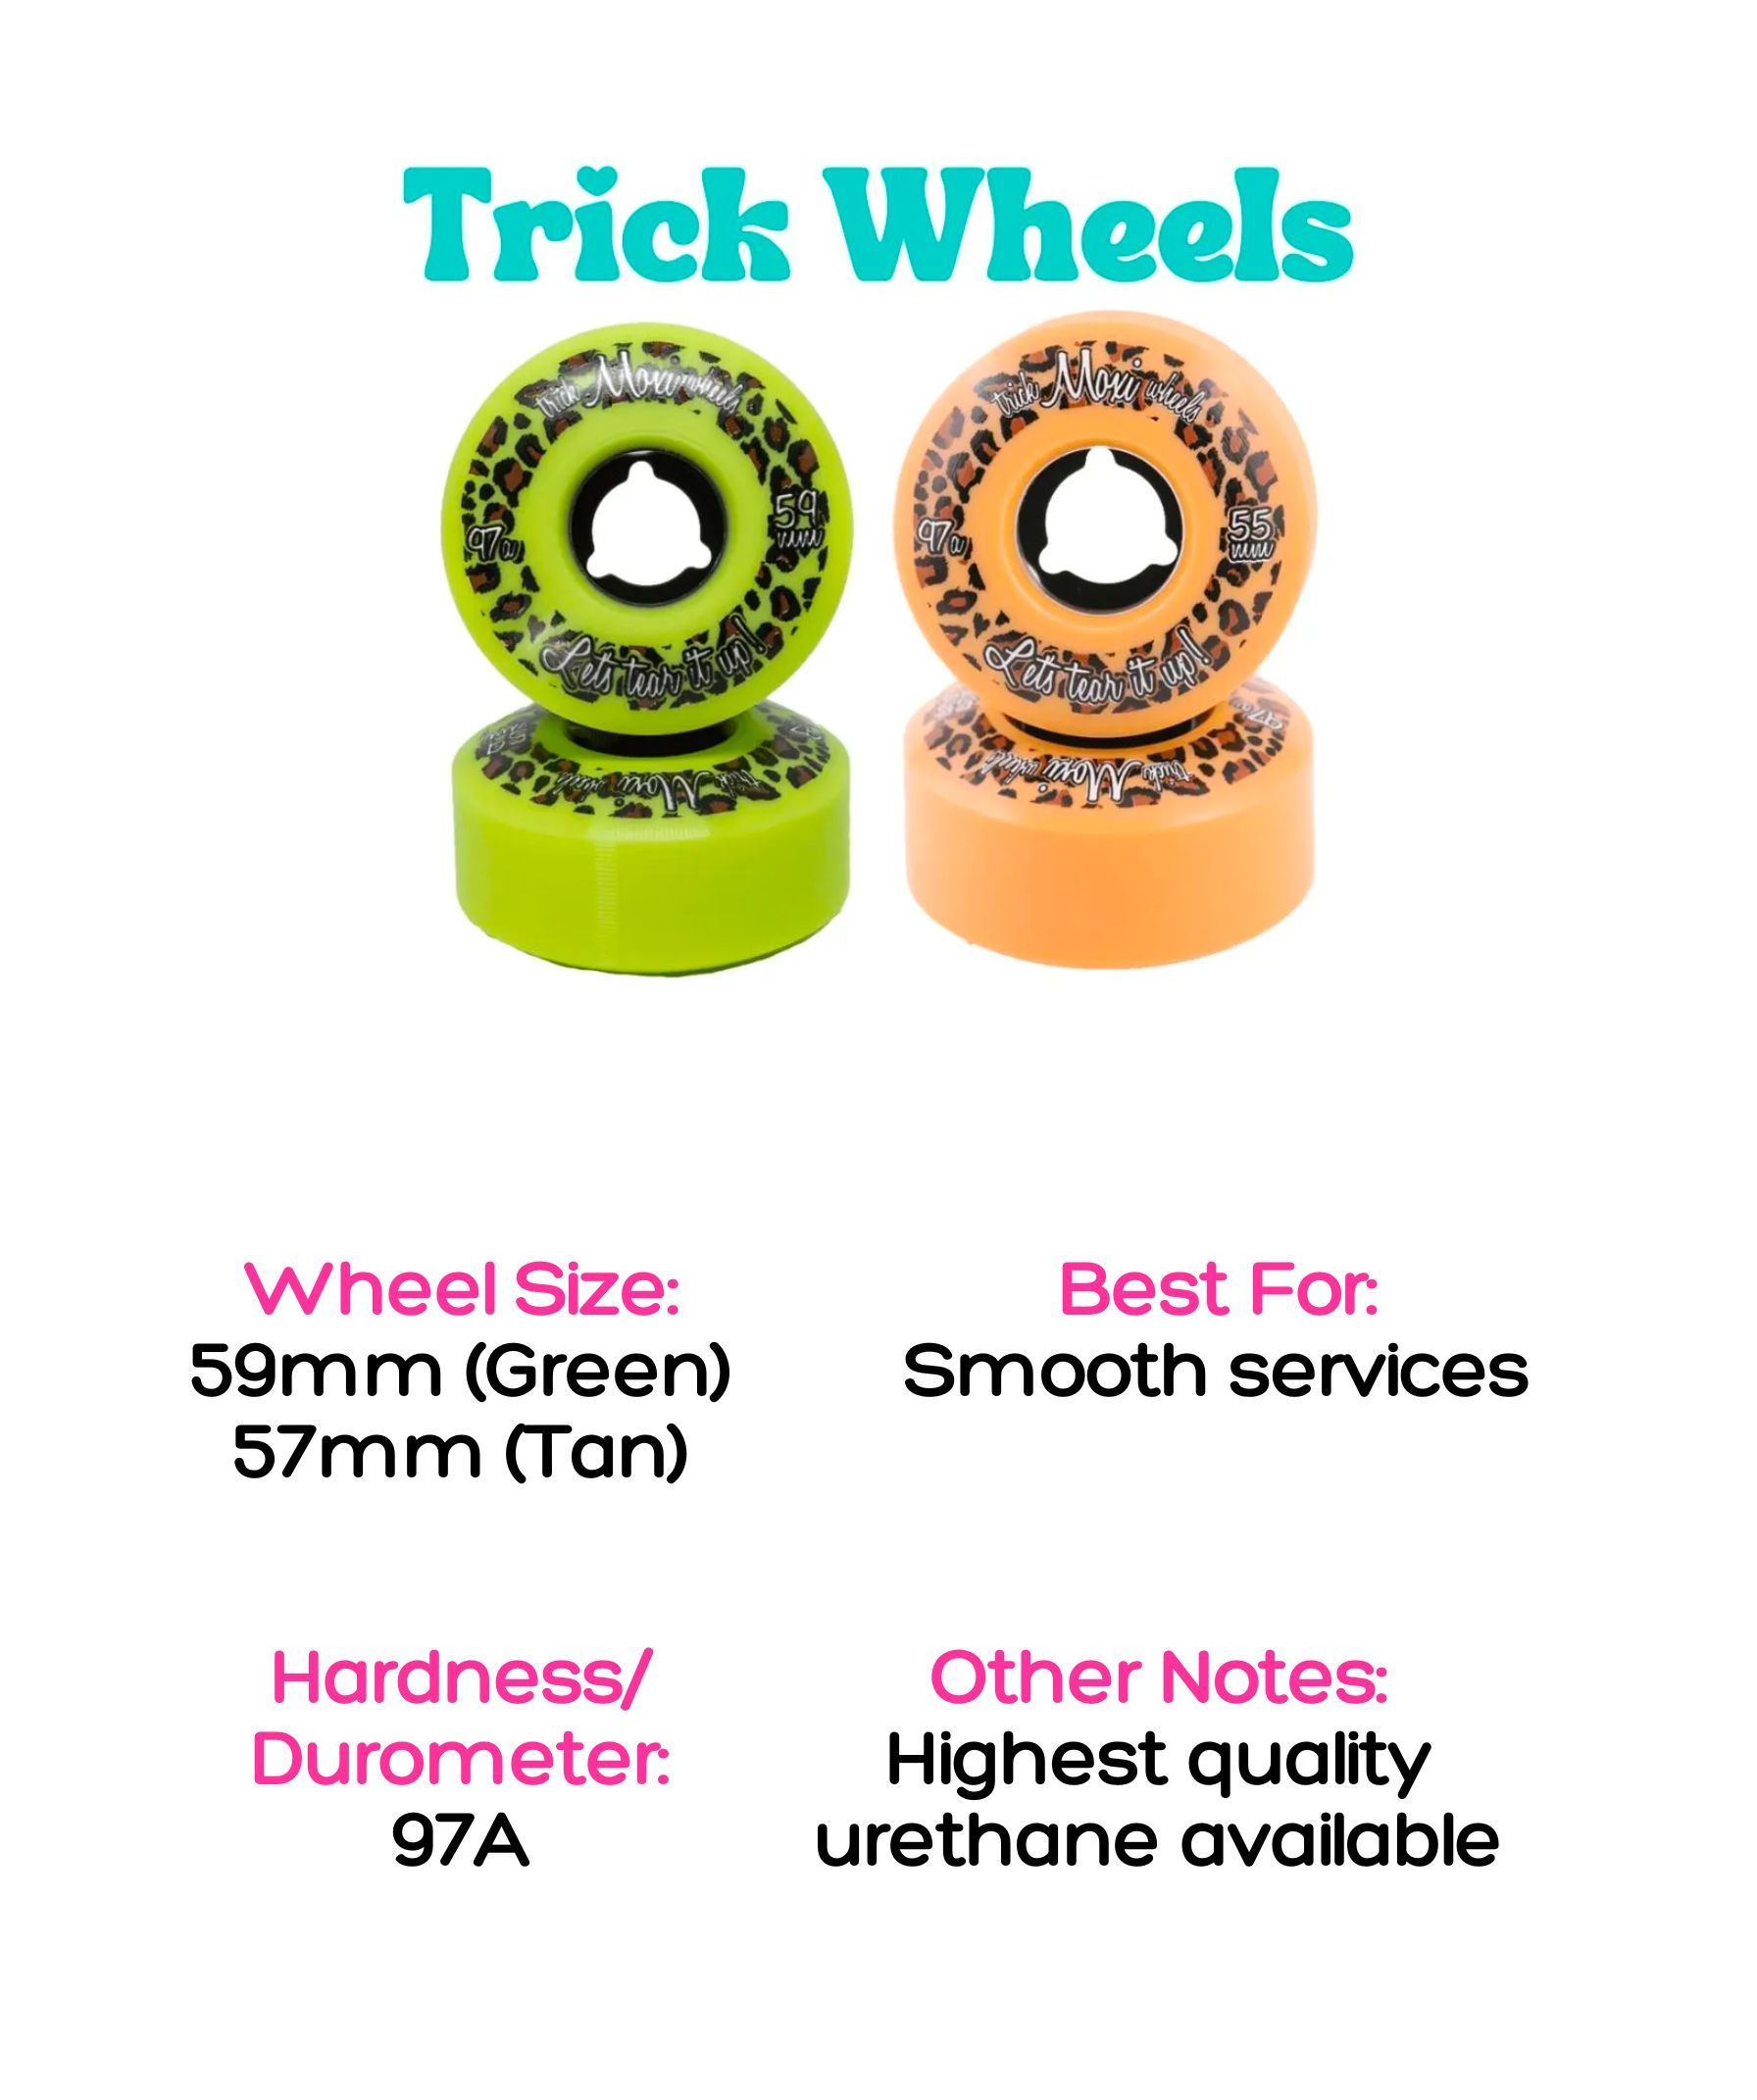 moxi trick wheels, comes in 59mm (green) 57mm (tan), 97A hardness, best for smooth surfaces, highest quality, urethane available